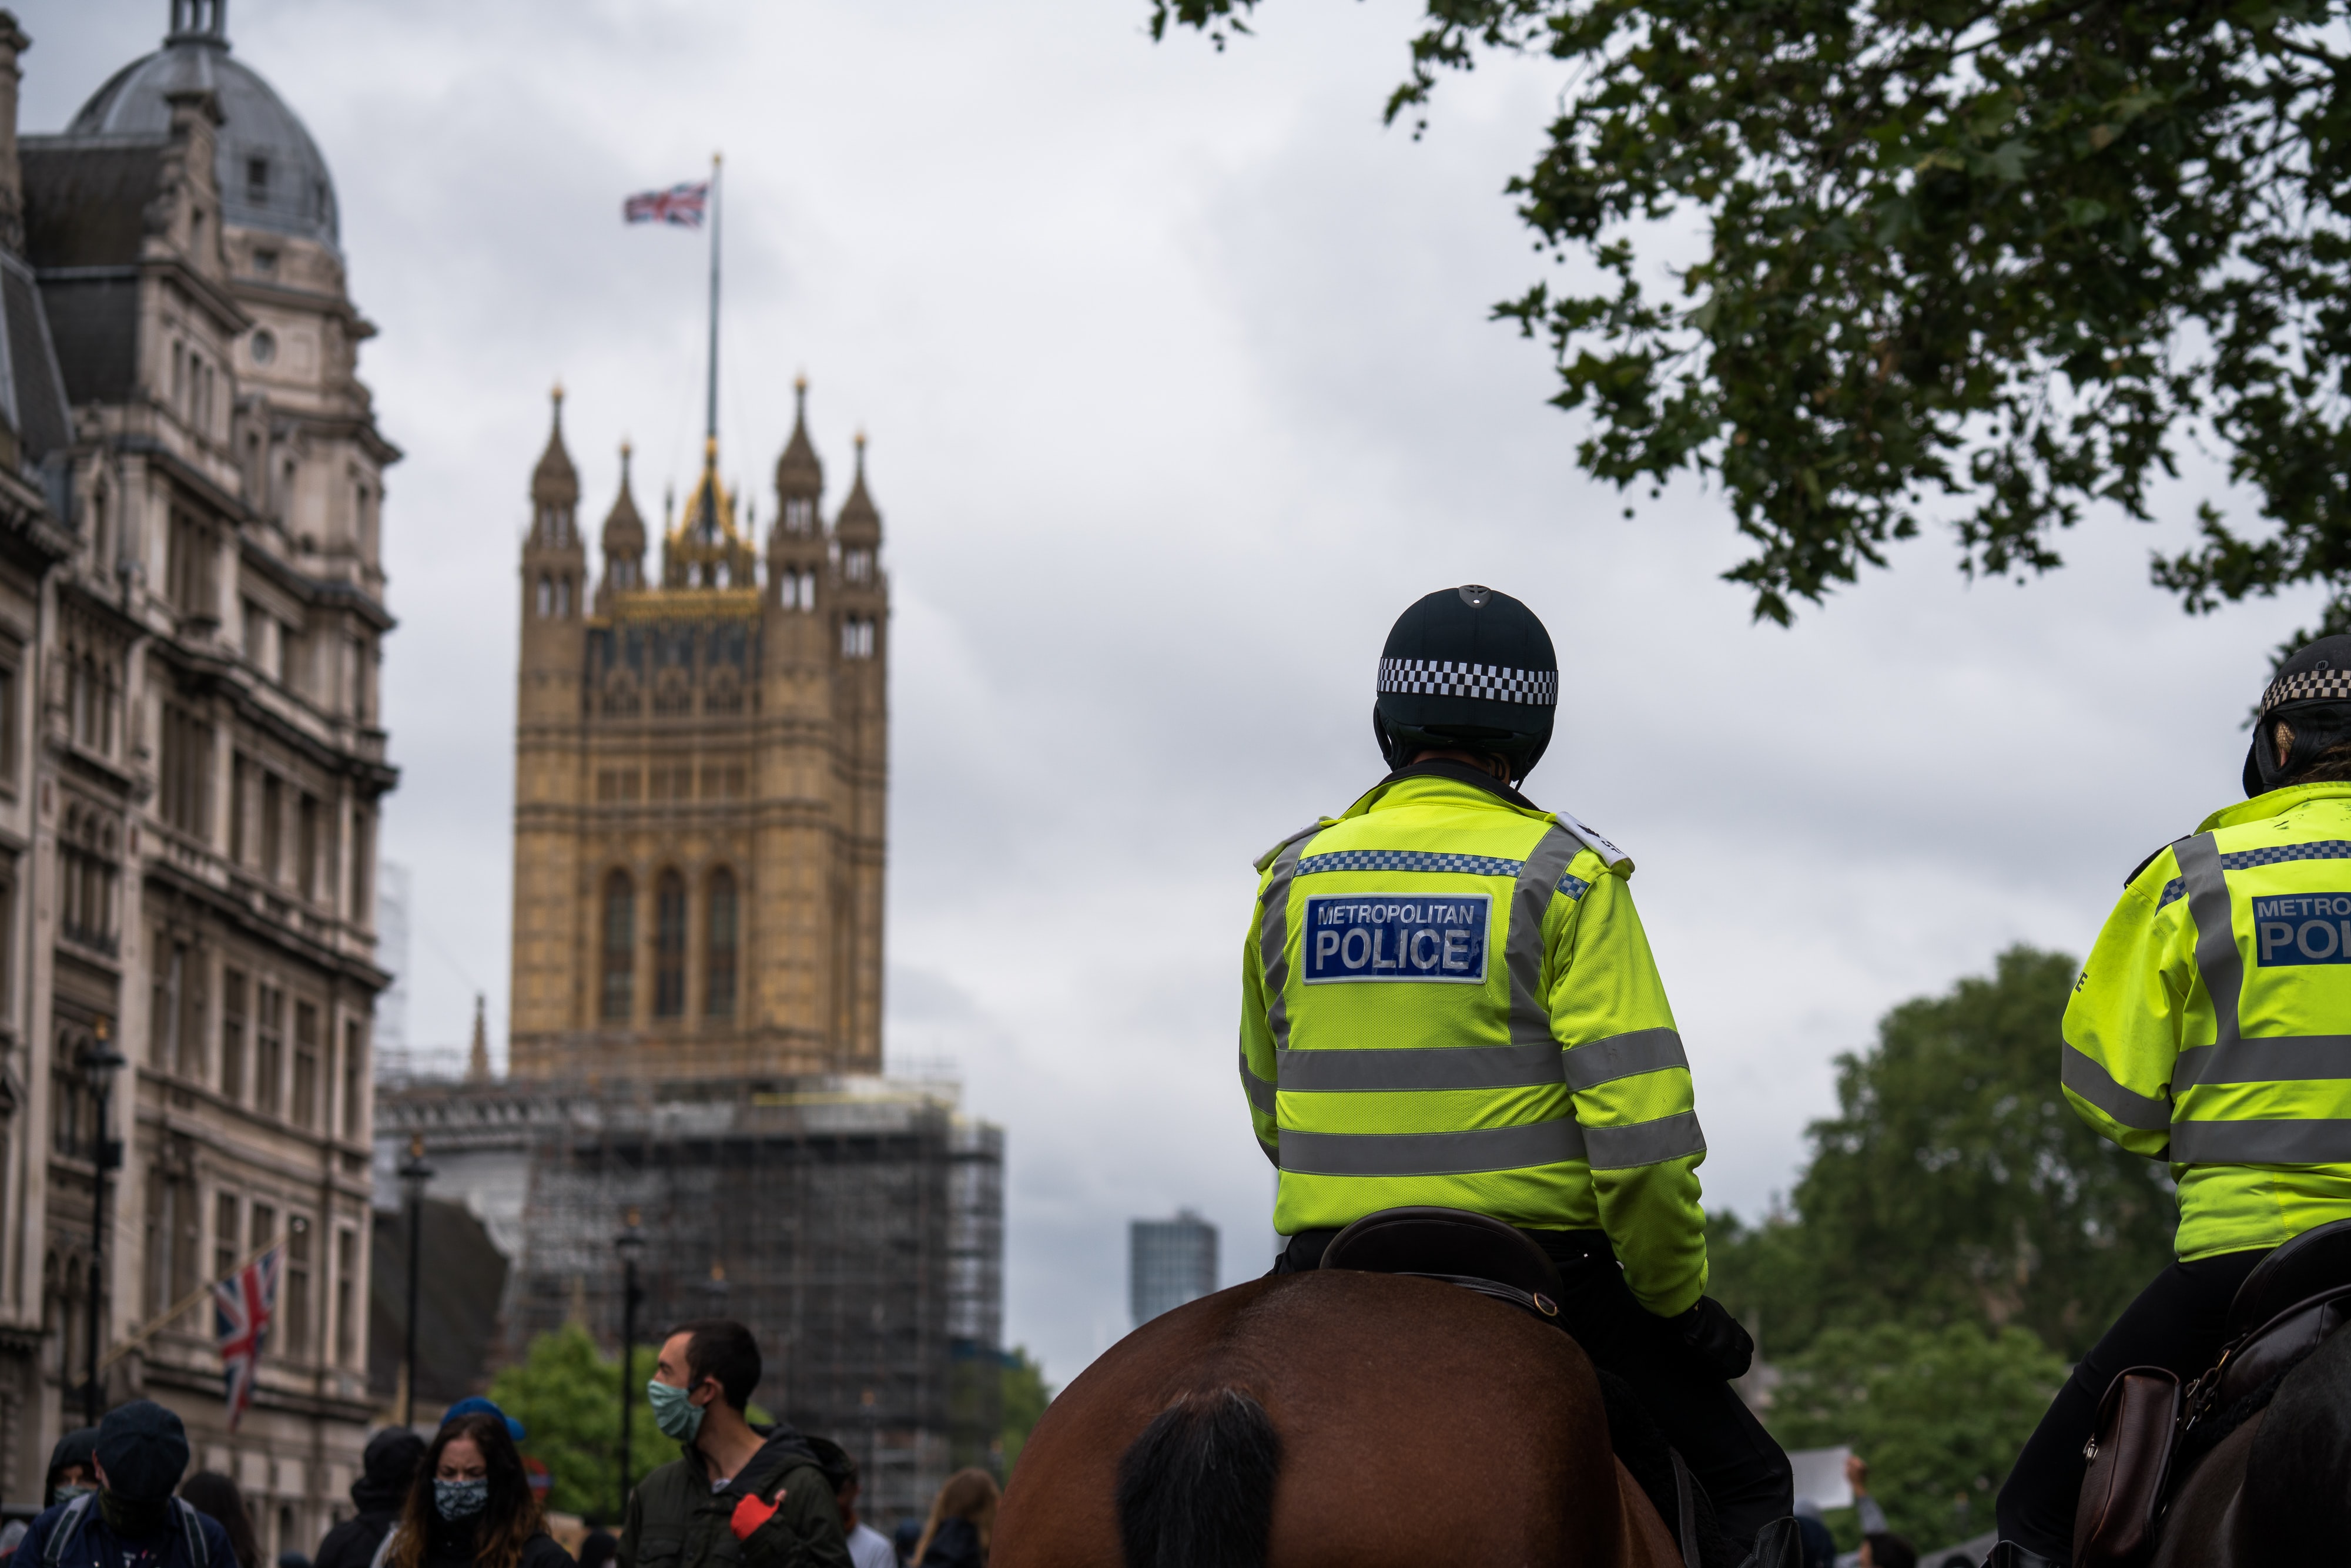 A Metropolitan Police officer on horseback, seen from behind in front of the Palace of Westminster